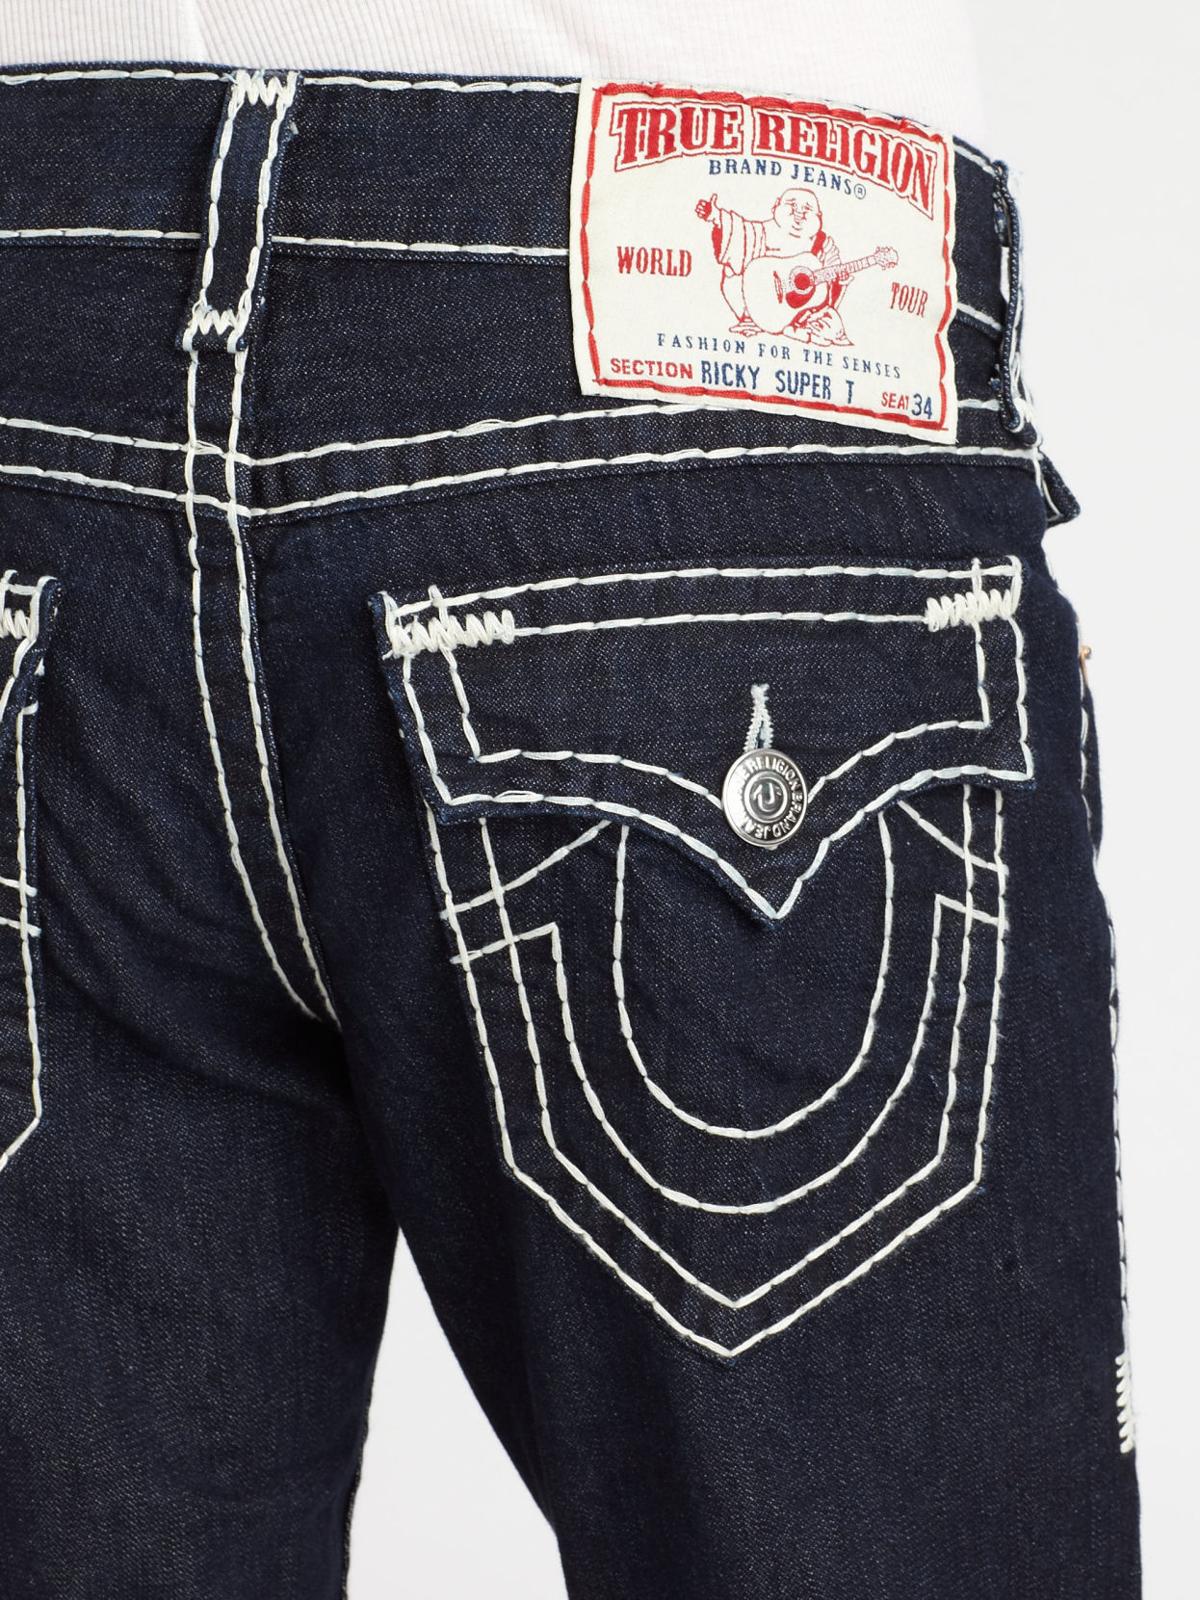 True Religion opens at Premium Outlets